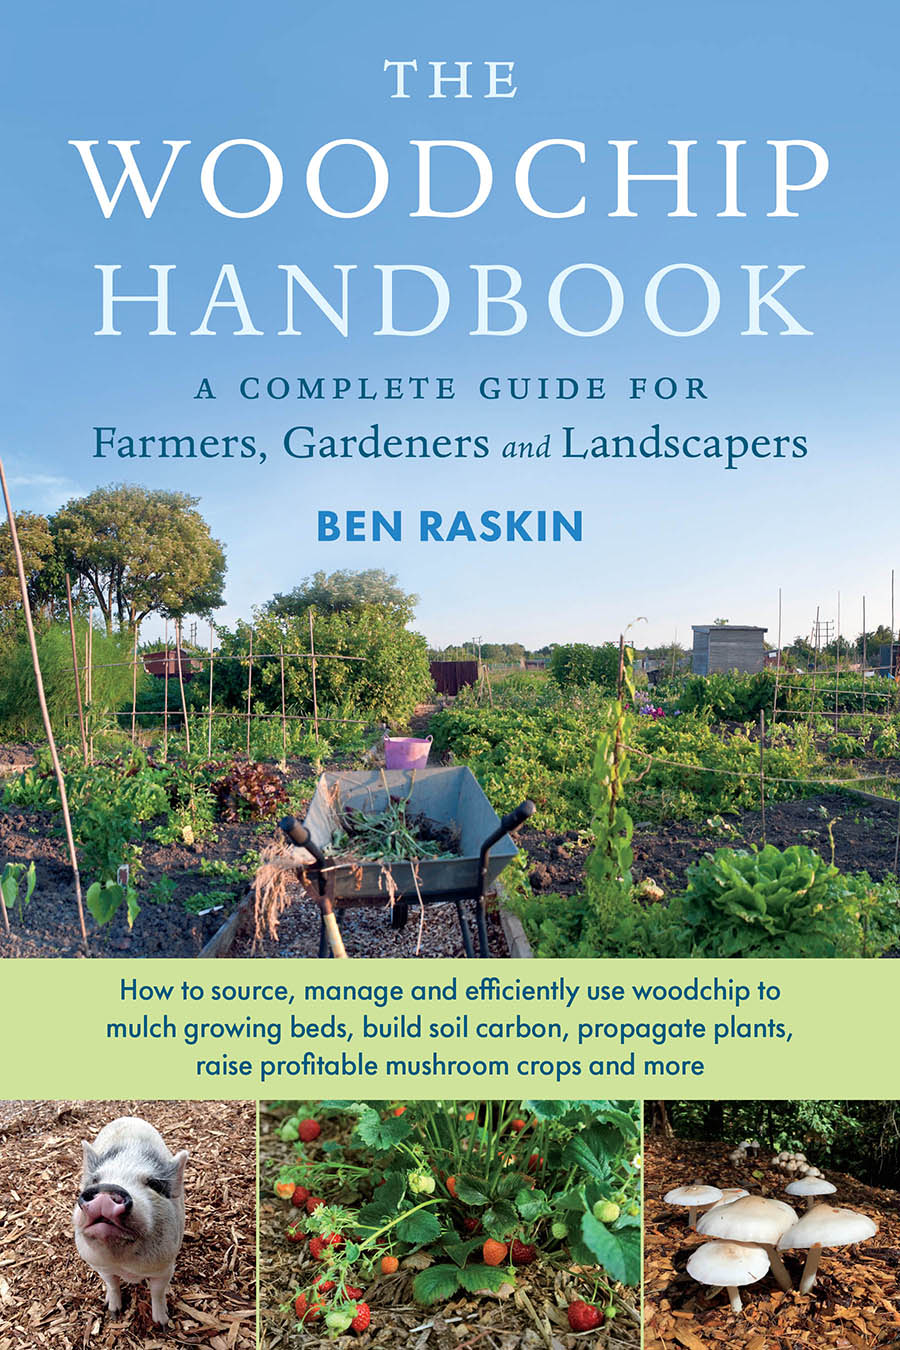 Image The woodchip handbook : a complete guide for farmers, gardeners and landscapers